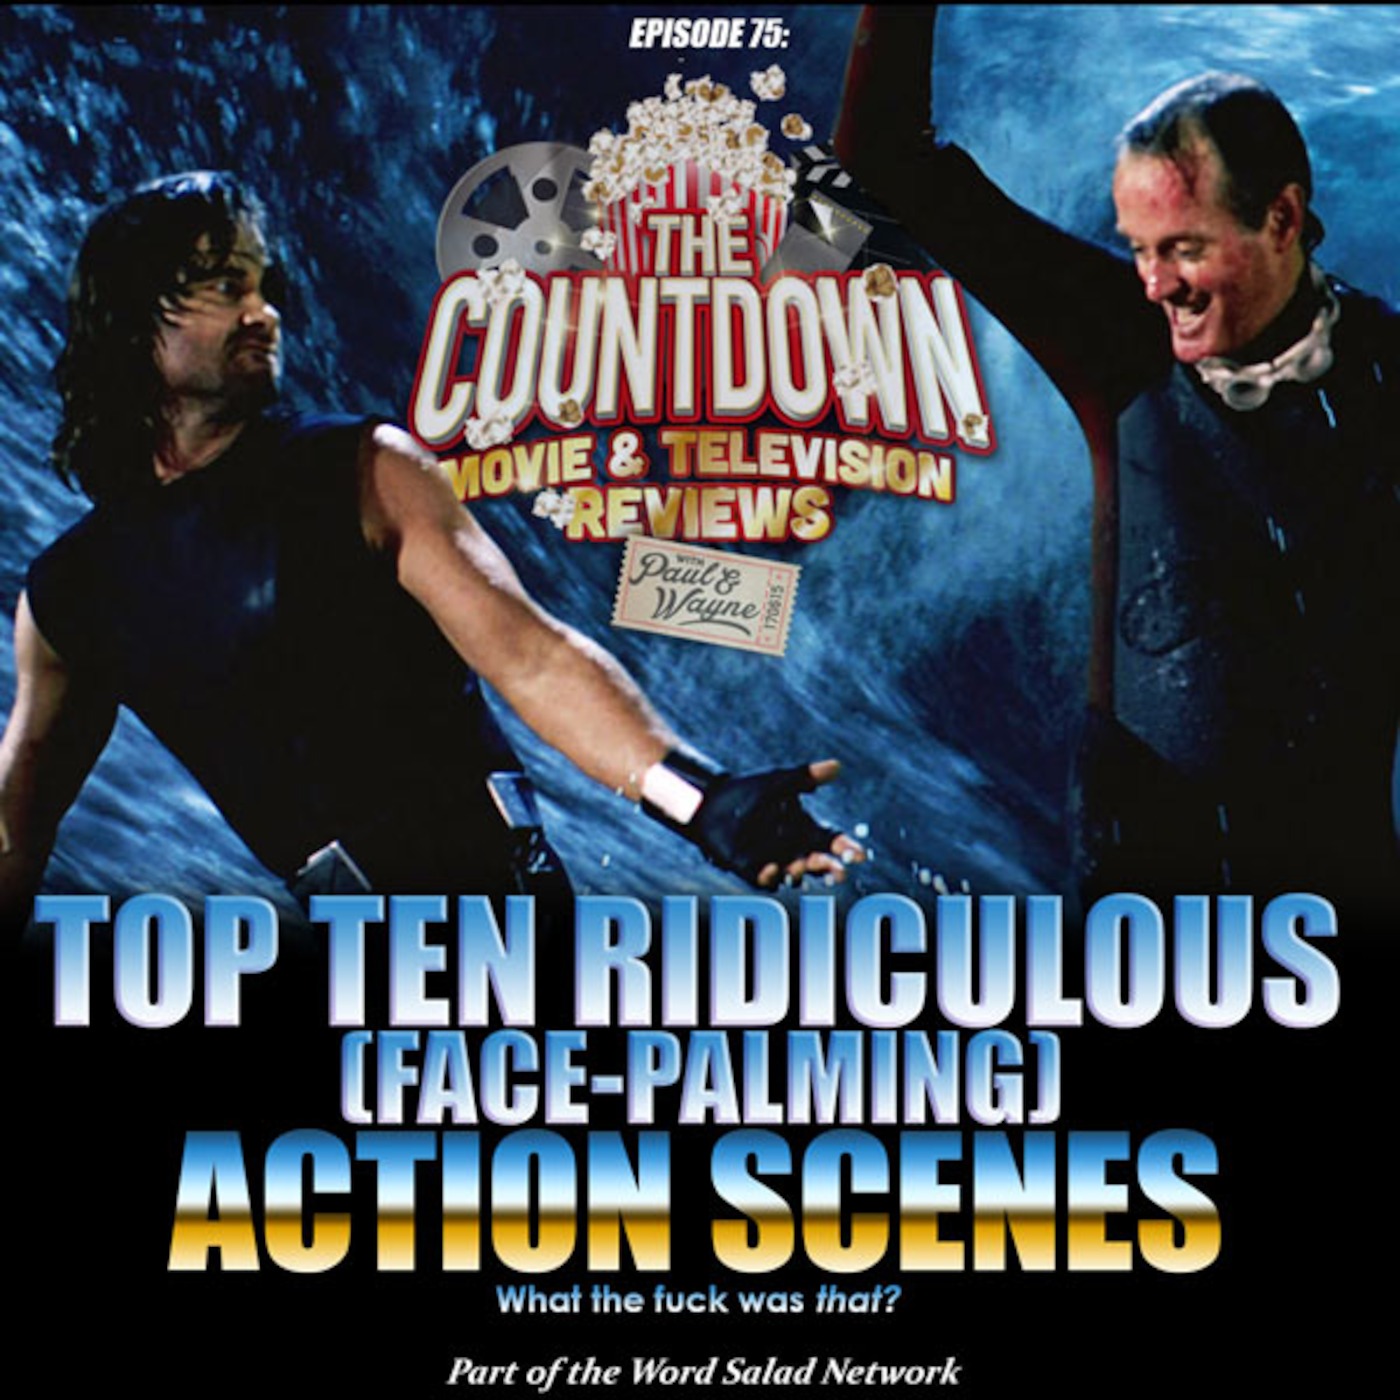 Episode 75: Top 10 Ridiculous (Face-Palming) Action Scenes